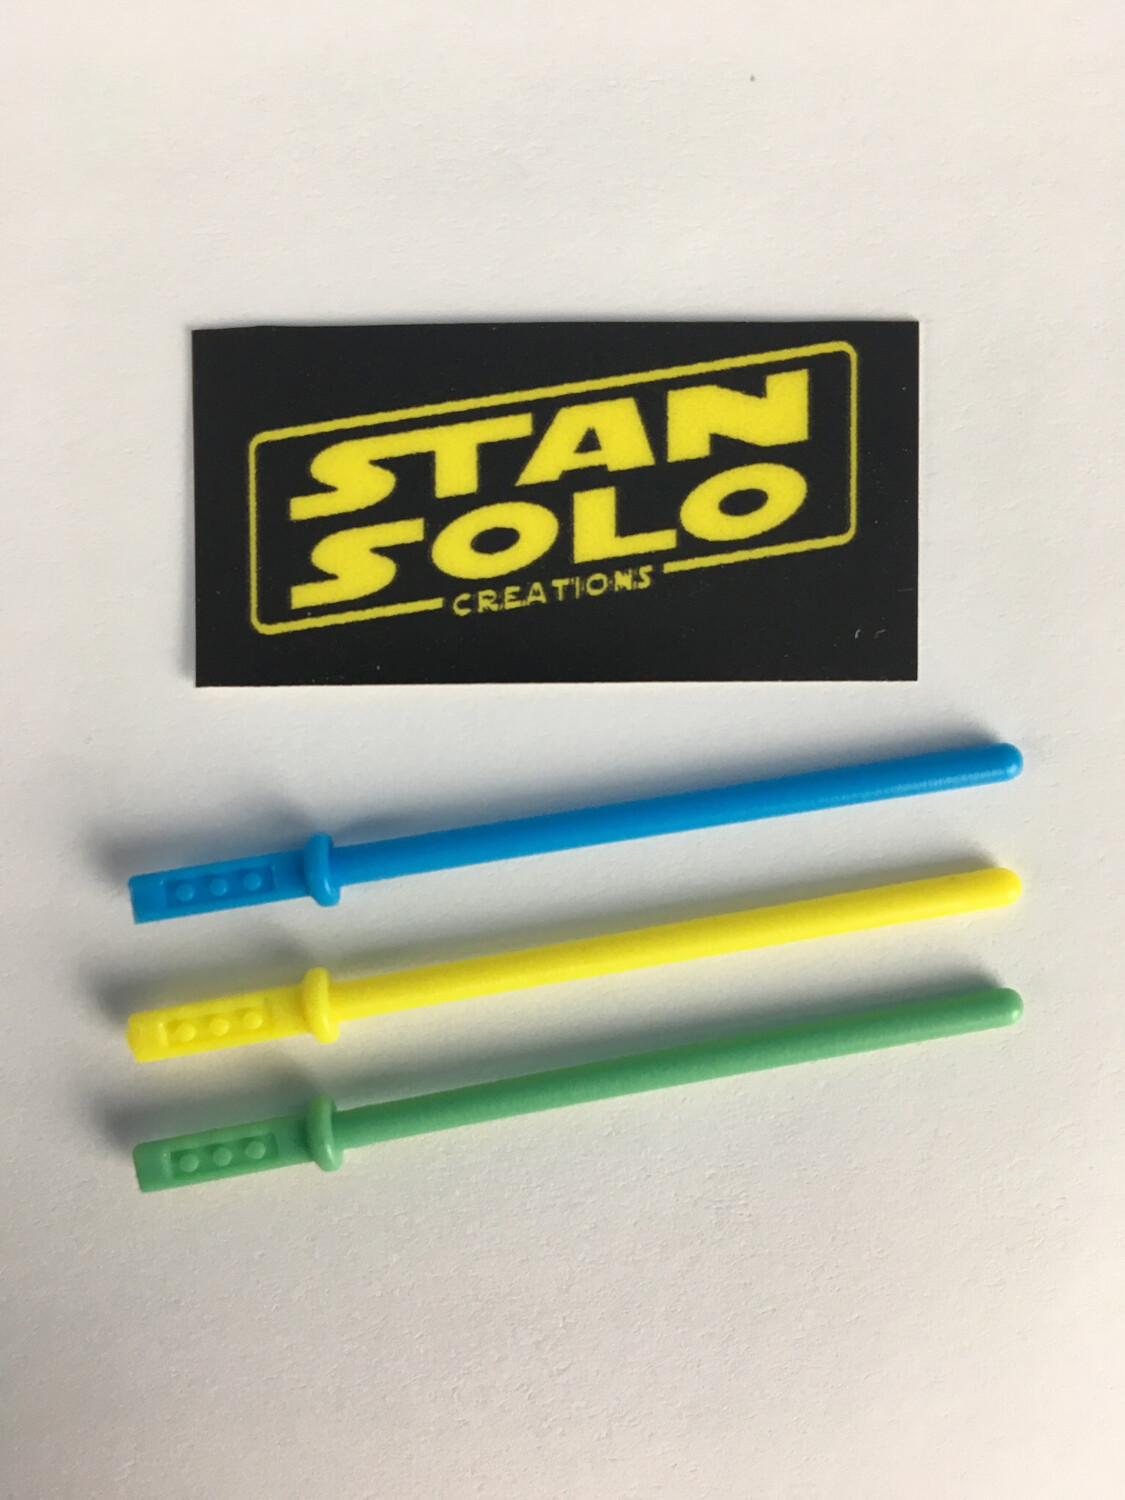 Stan Solo Custom Replacement Jedi Lightsabers Set Of 3